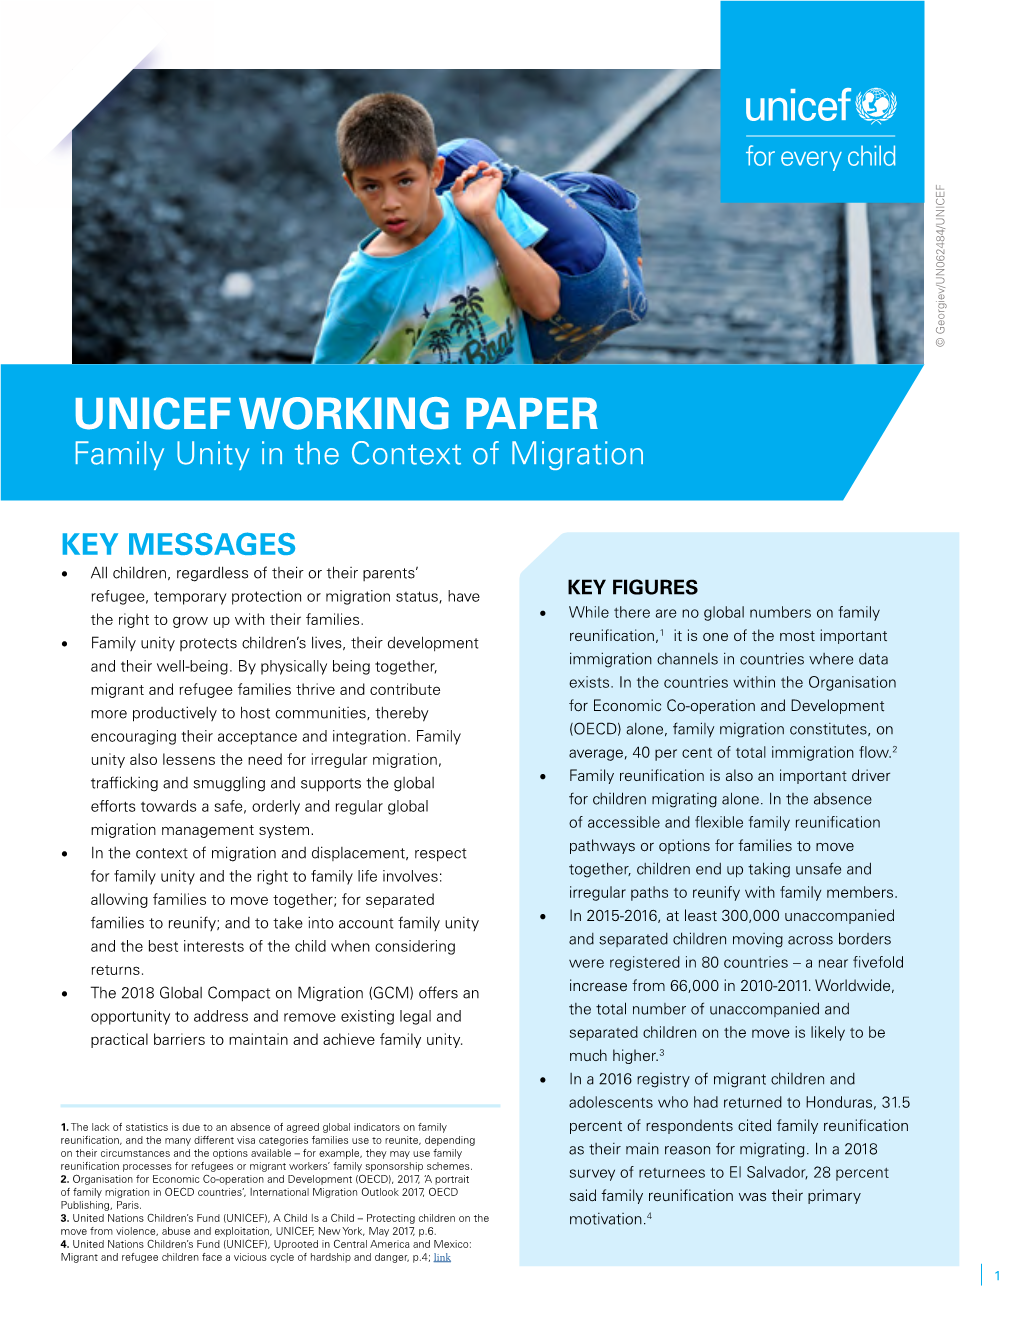 UNICEF WORKING PAPER Family Unity in the Context of Migration